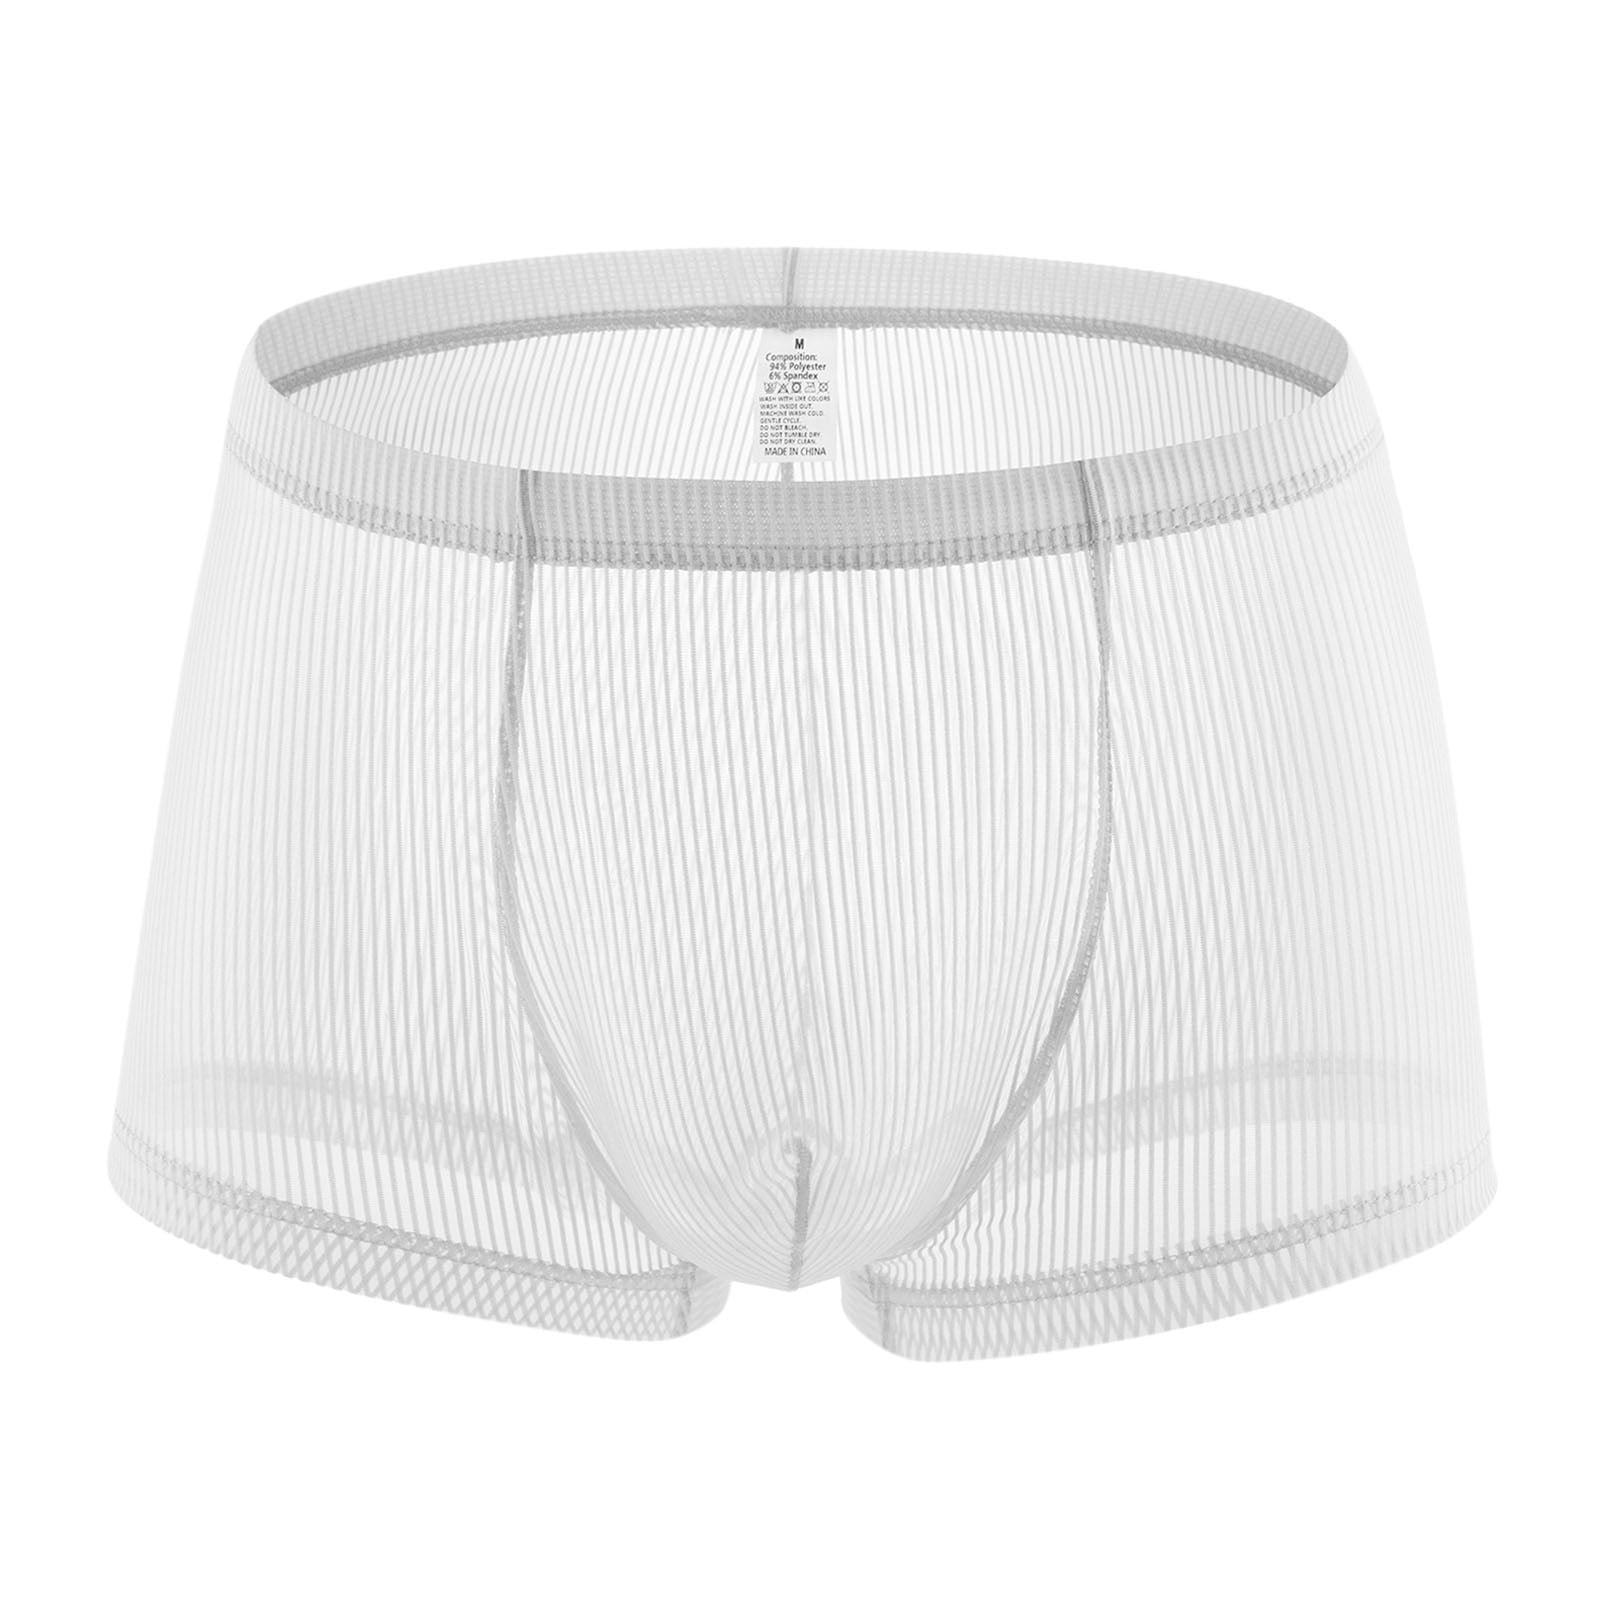 Boys' white panties with marine anchors